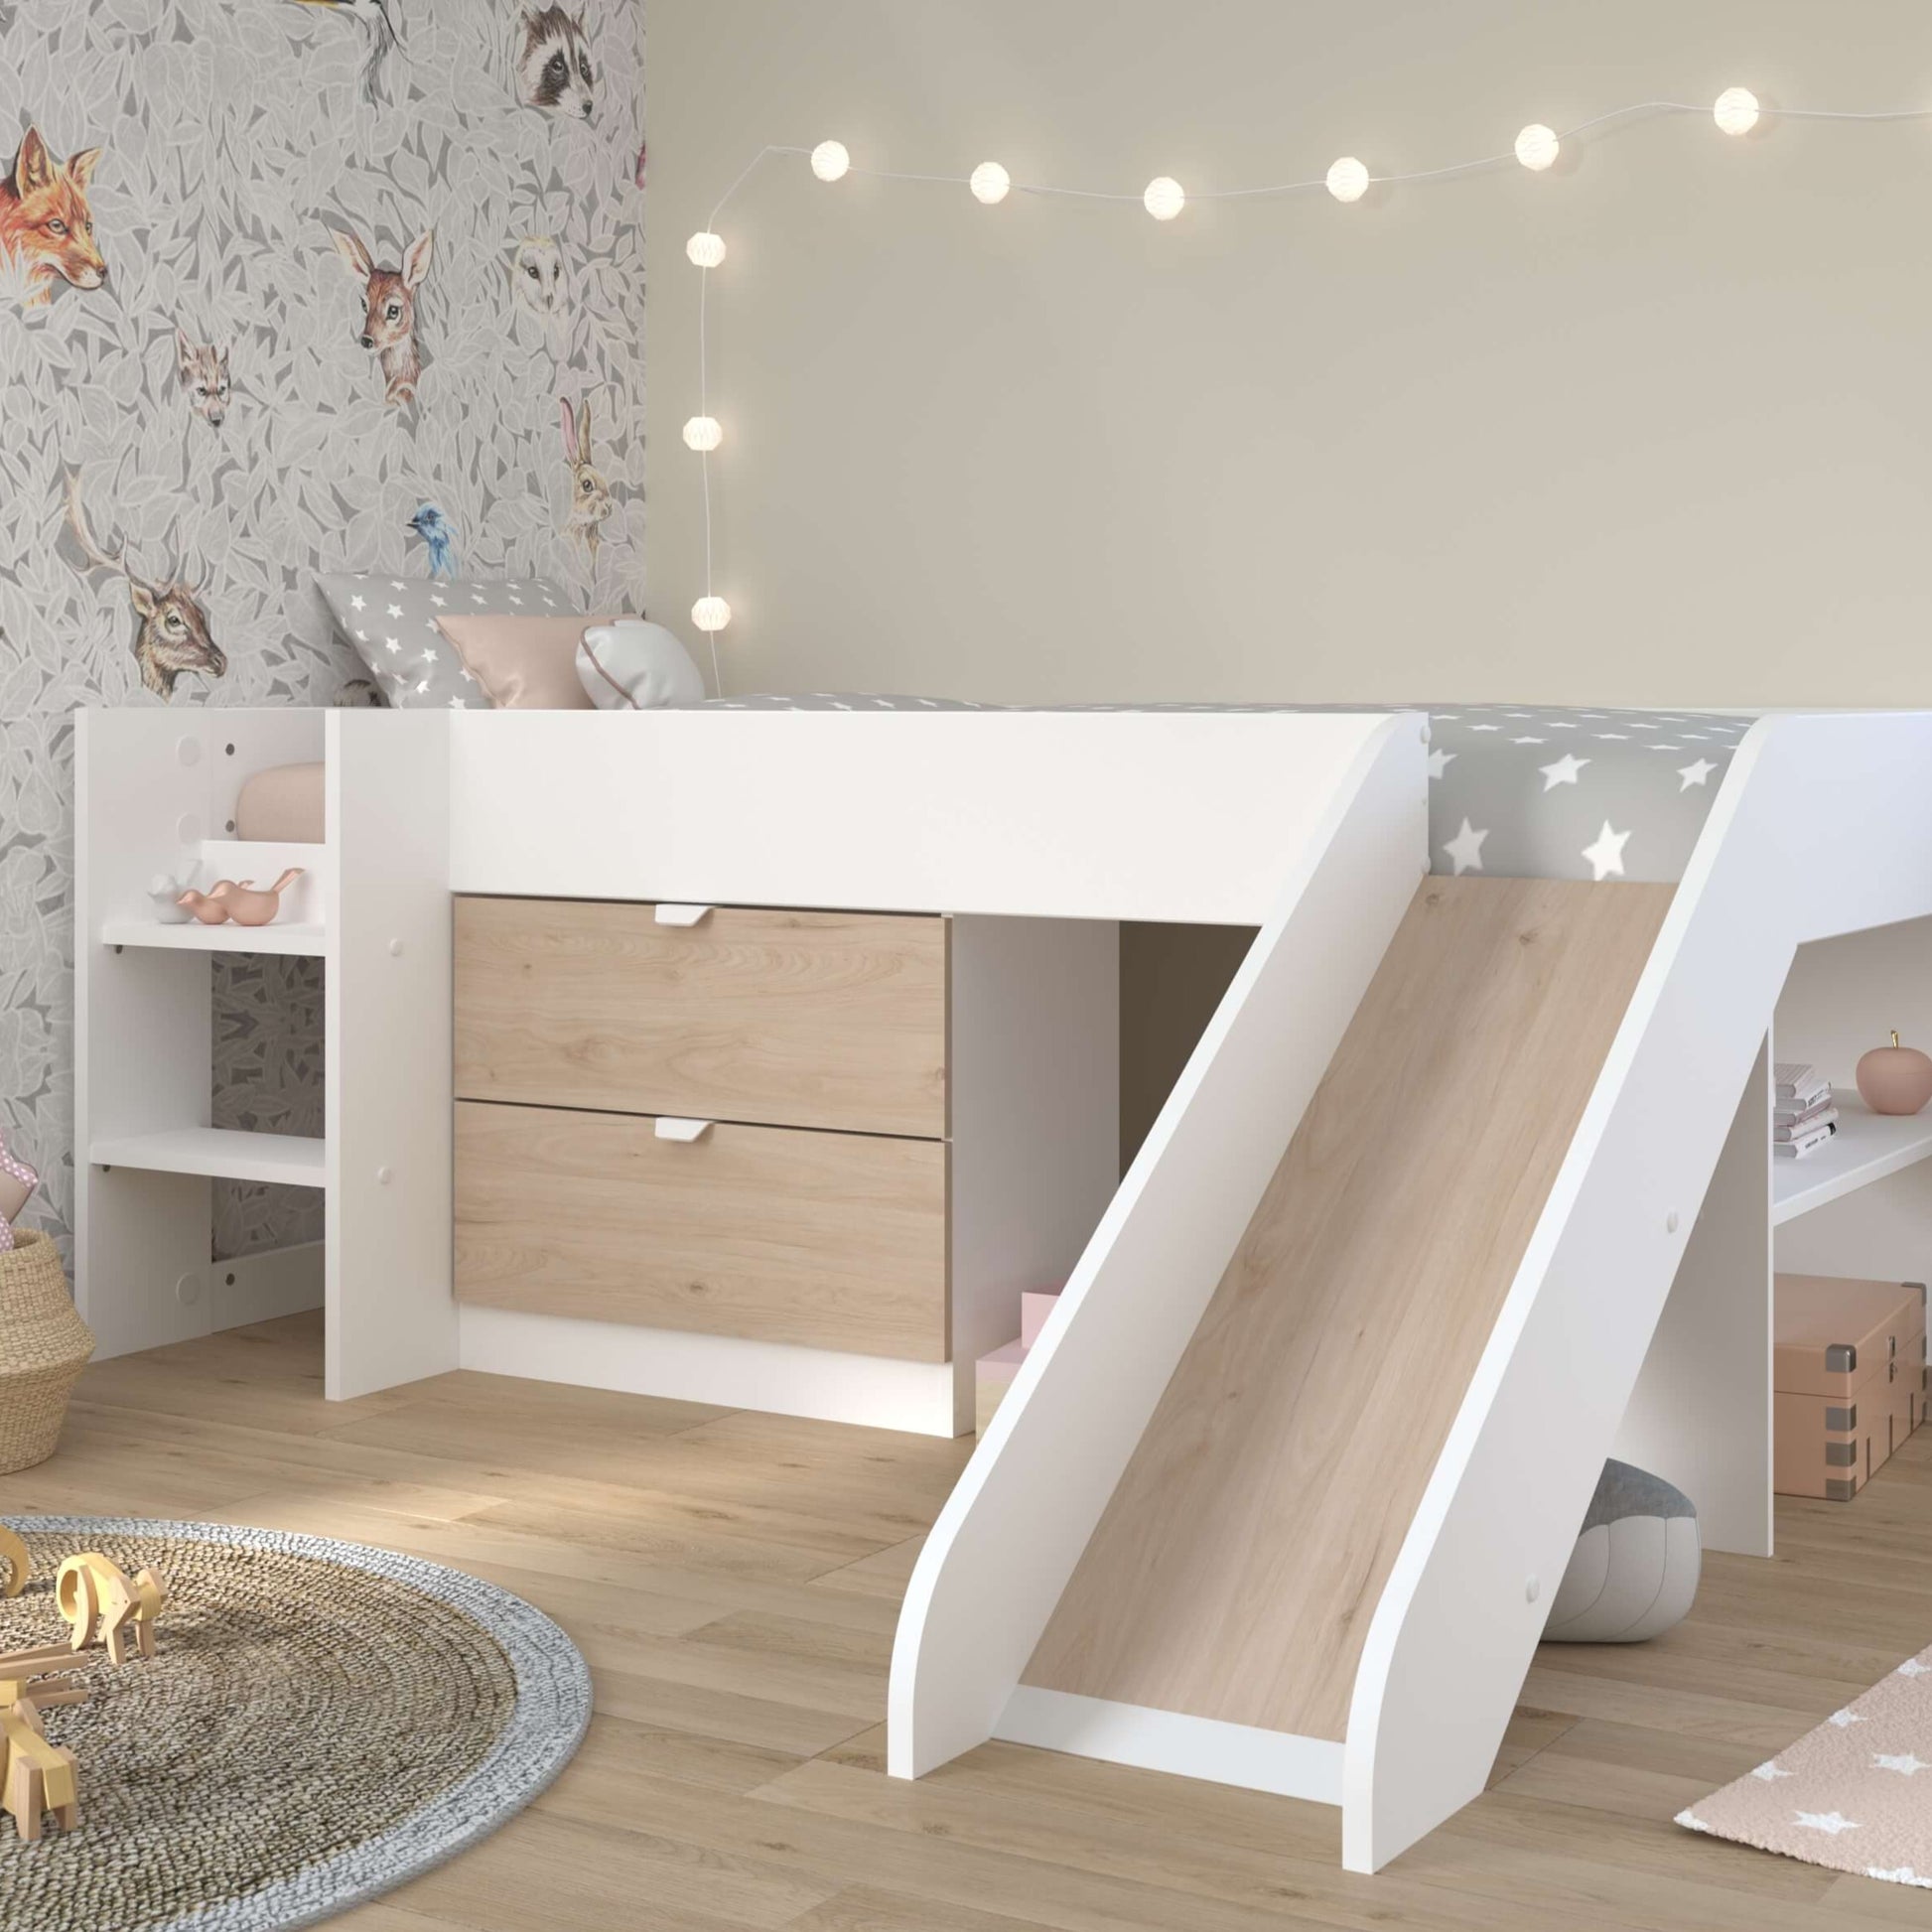 Tobo Mid Sleeper Bed with Slide & Drawers In Girls Room